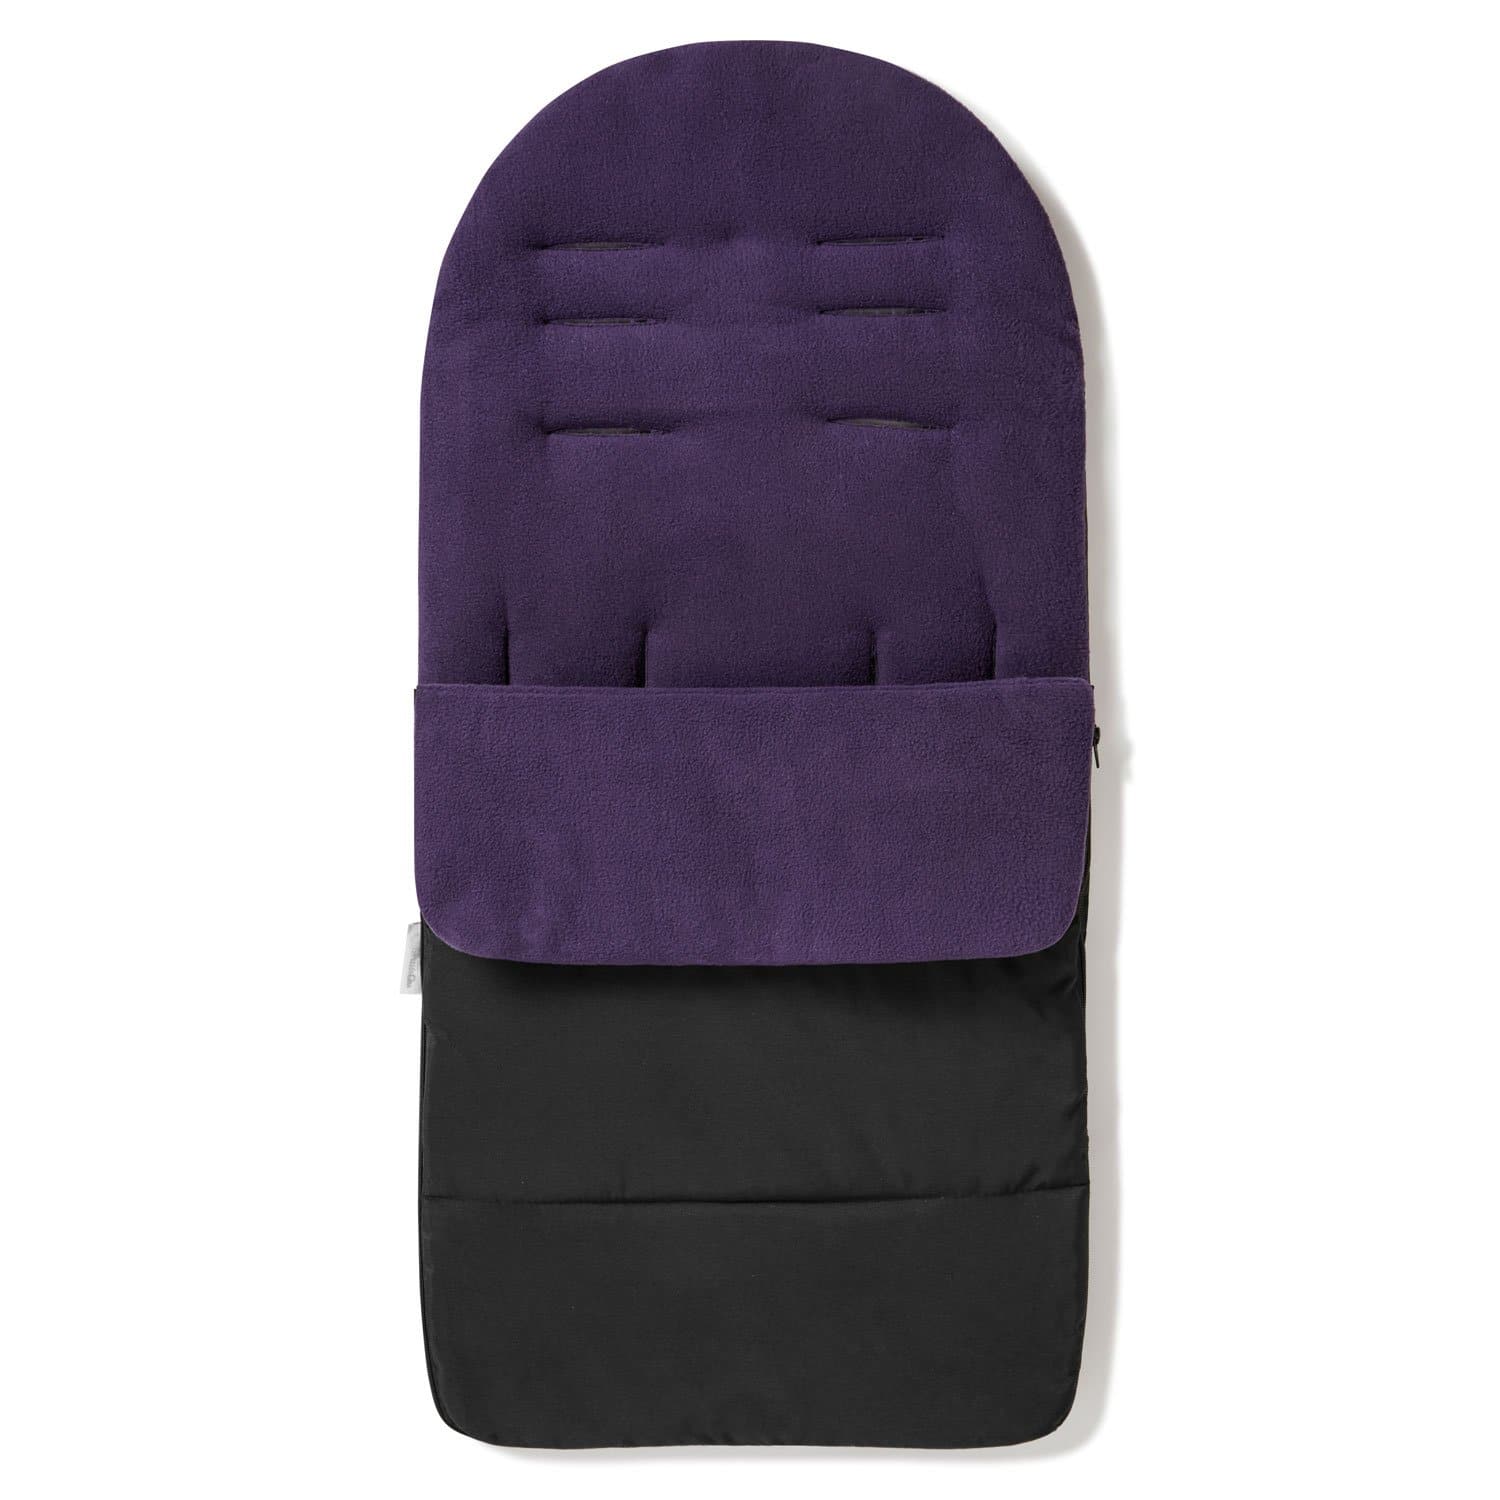 Premium Footmuff / Cosy Toes Compatible with Looping - Plum Purple / Fits All Models | For Your Little One